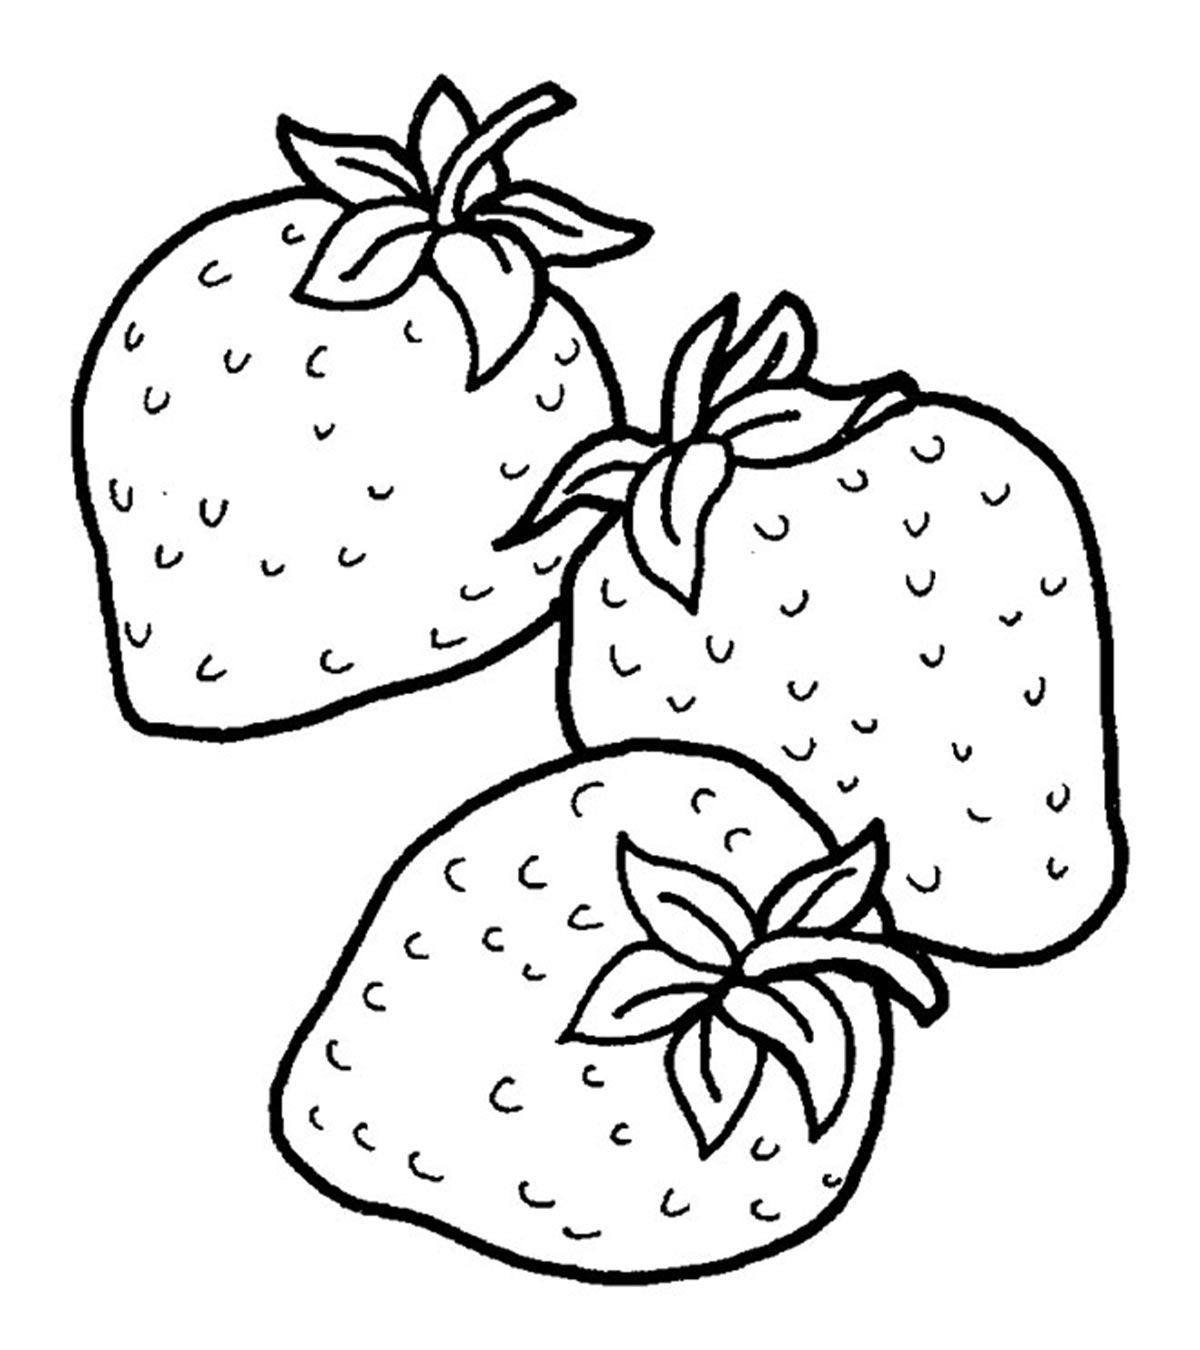 Top 15 Strawberry Coloring Pages For Your Little One_image